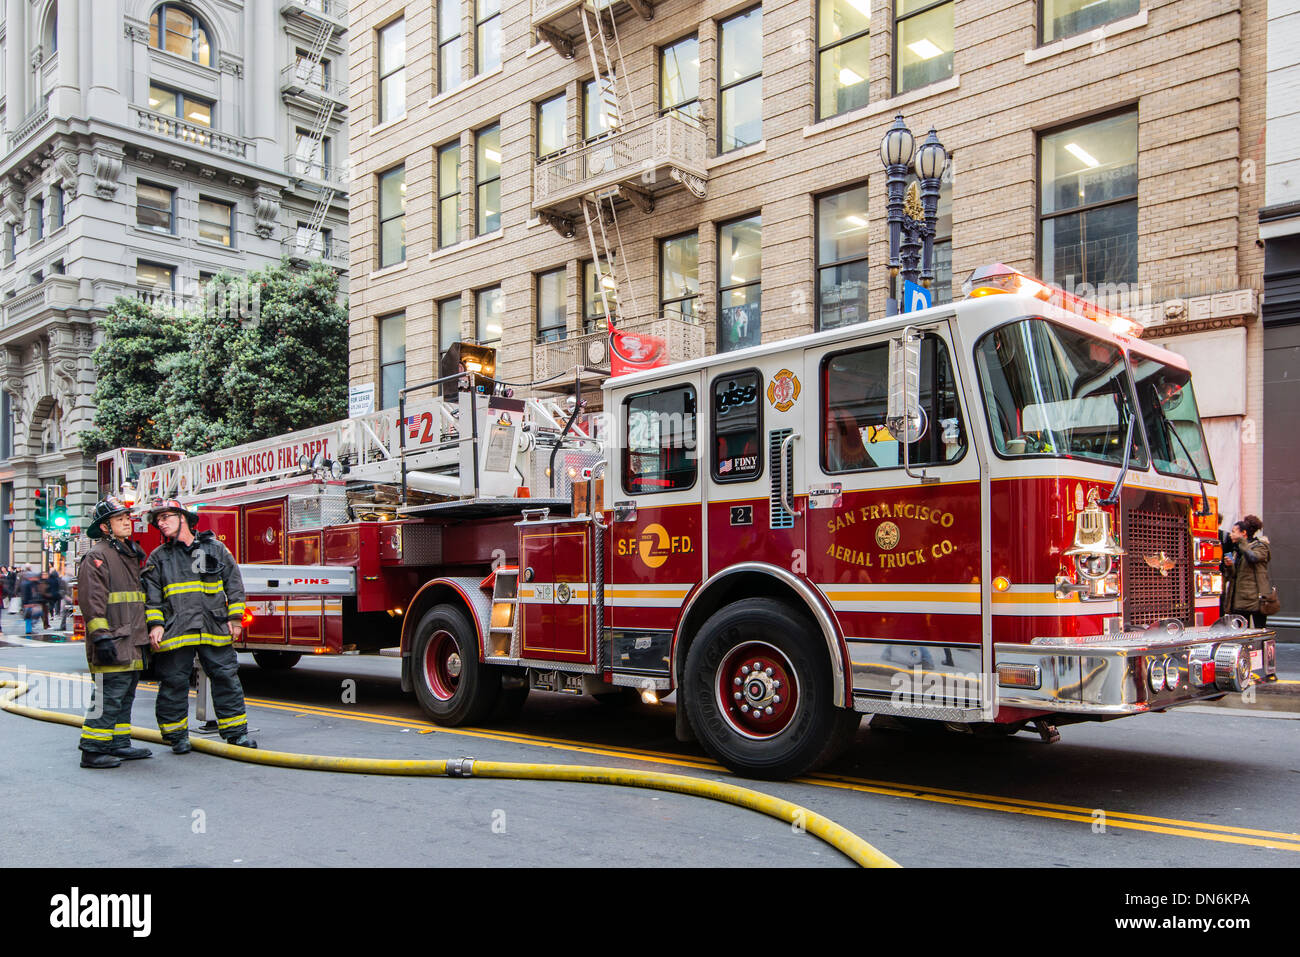 Two firefighters near a fire truck in a street of downtown San Francisco, California, USA Stock Photo